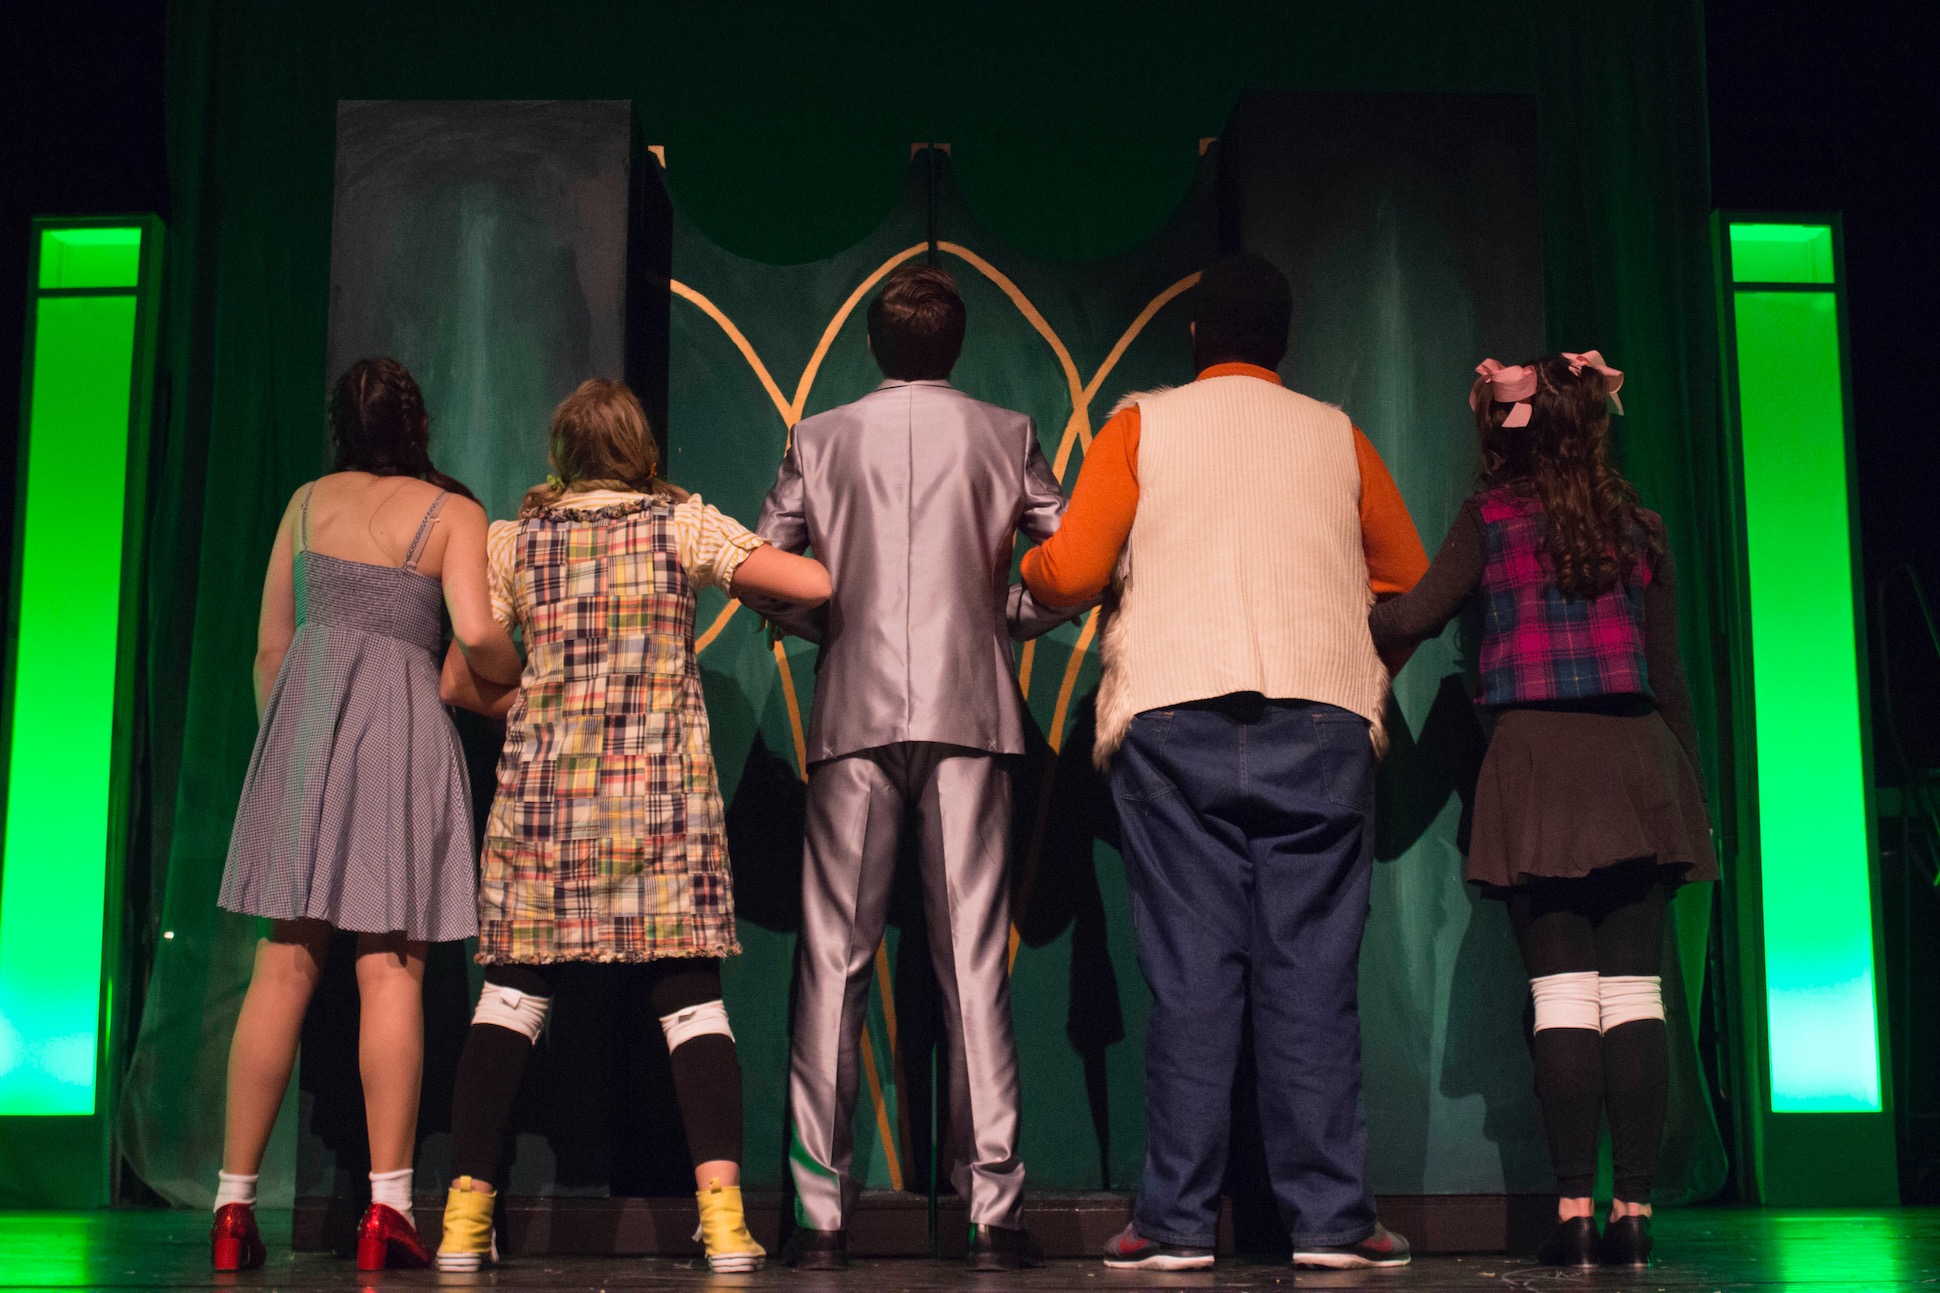 main cast of wizard of oz play characters stand facing the back of the stage with arms linked